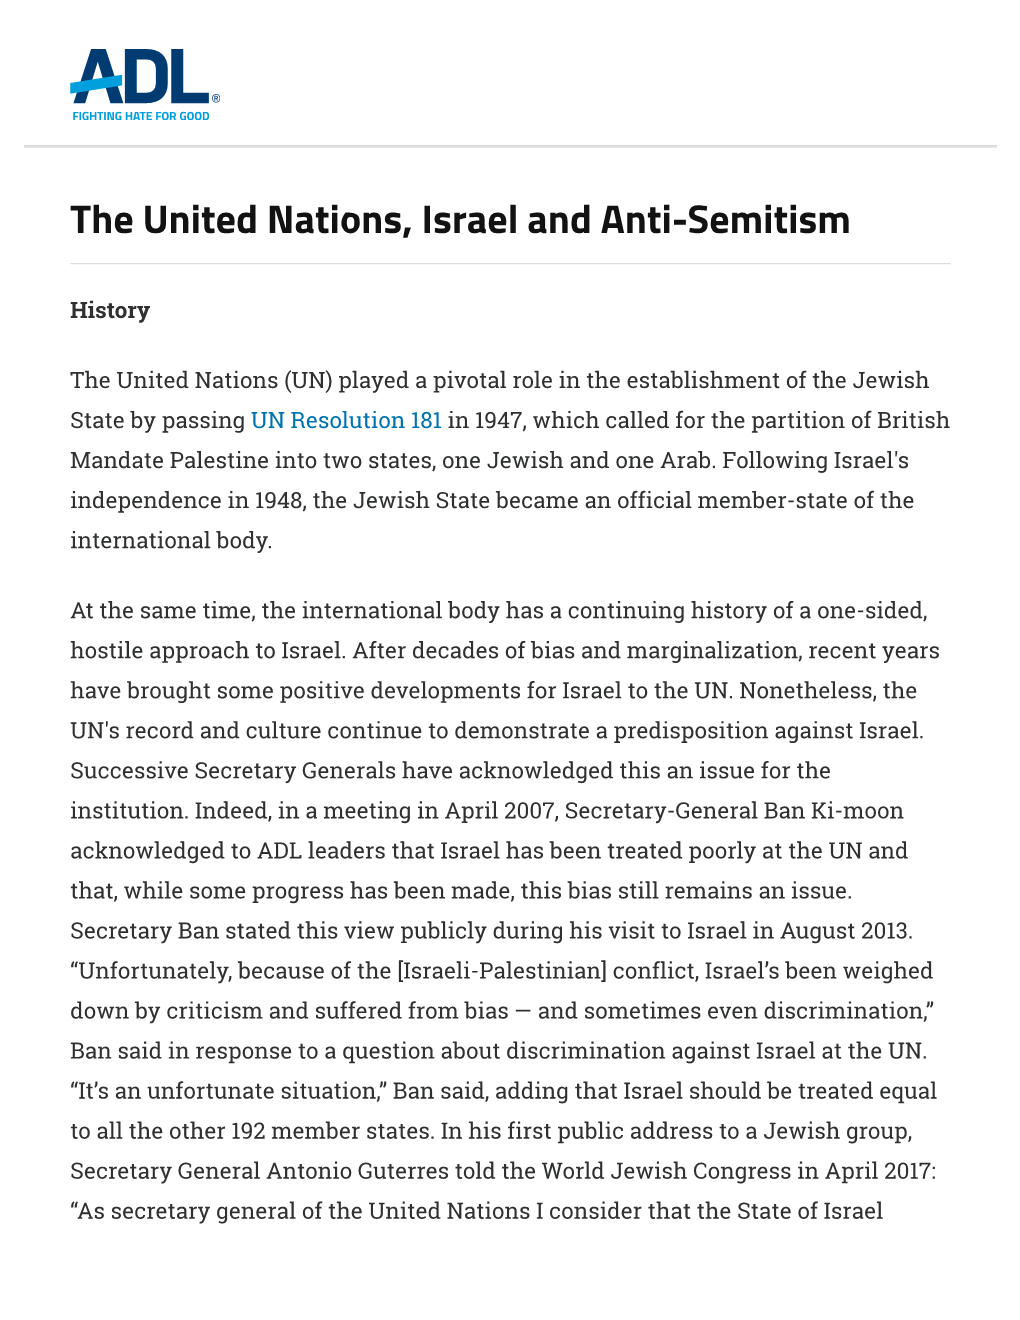 The United Nations, Israel and Anti-Semitism